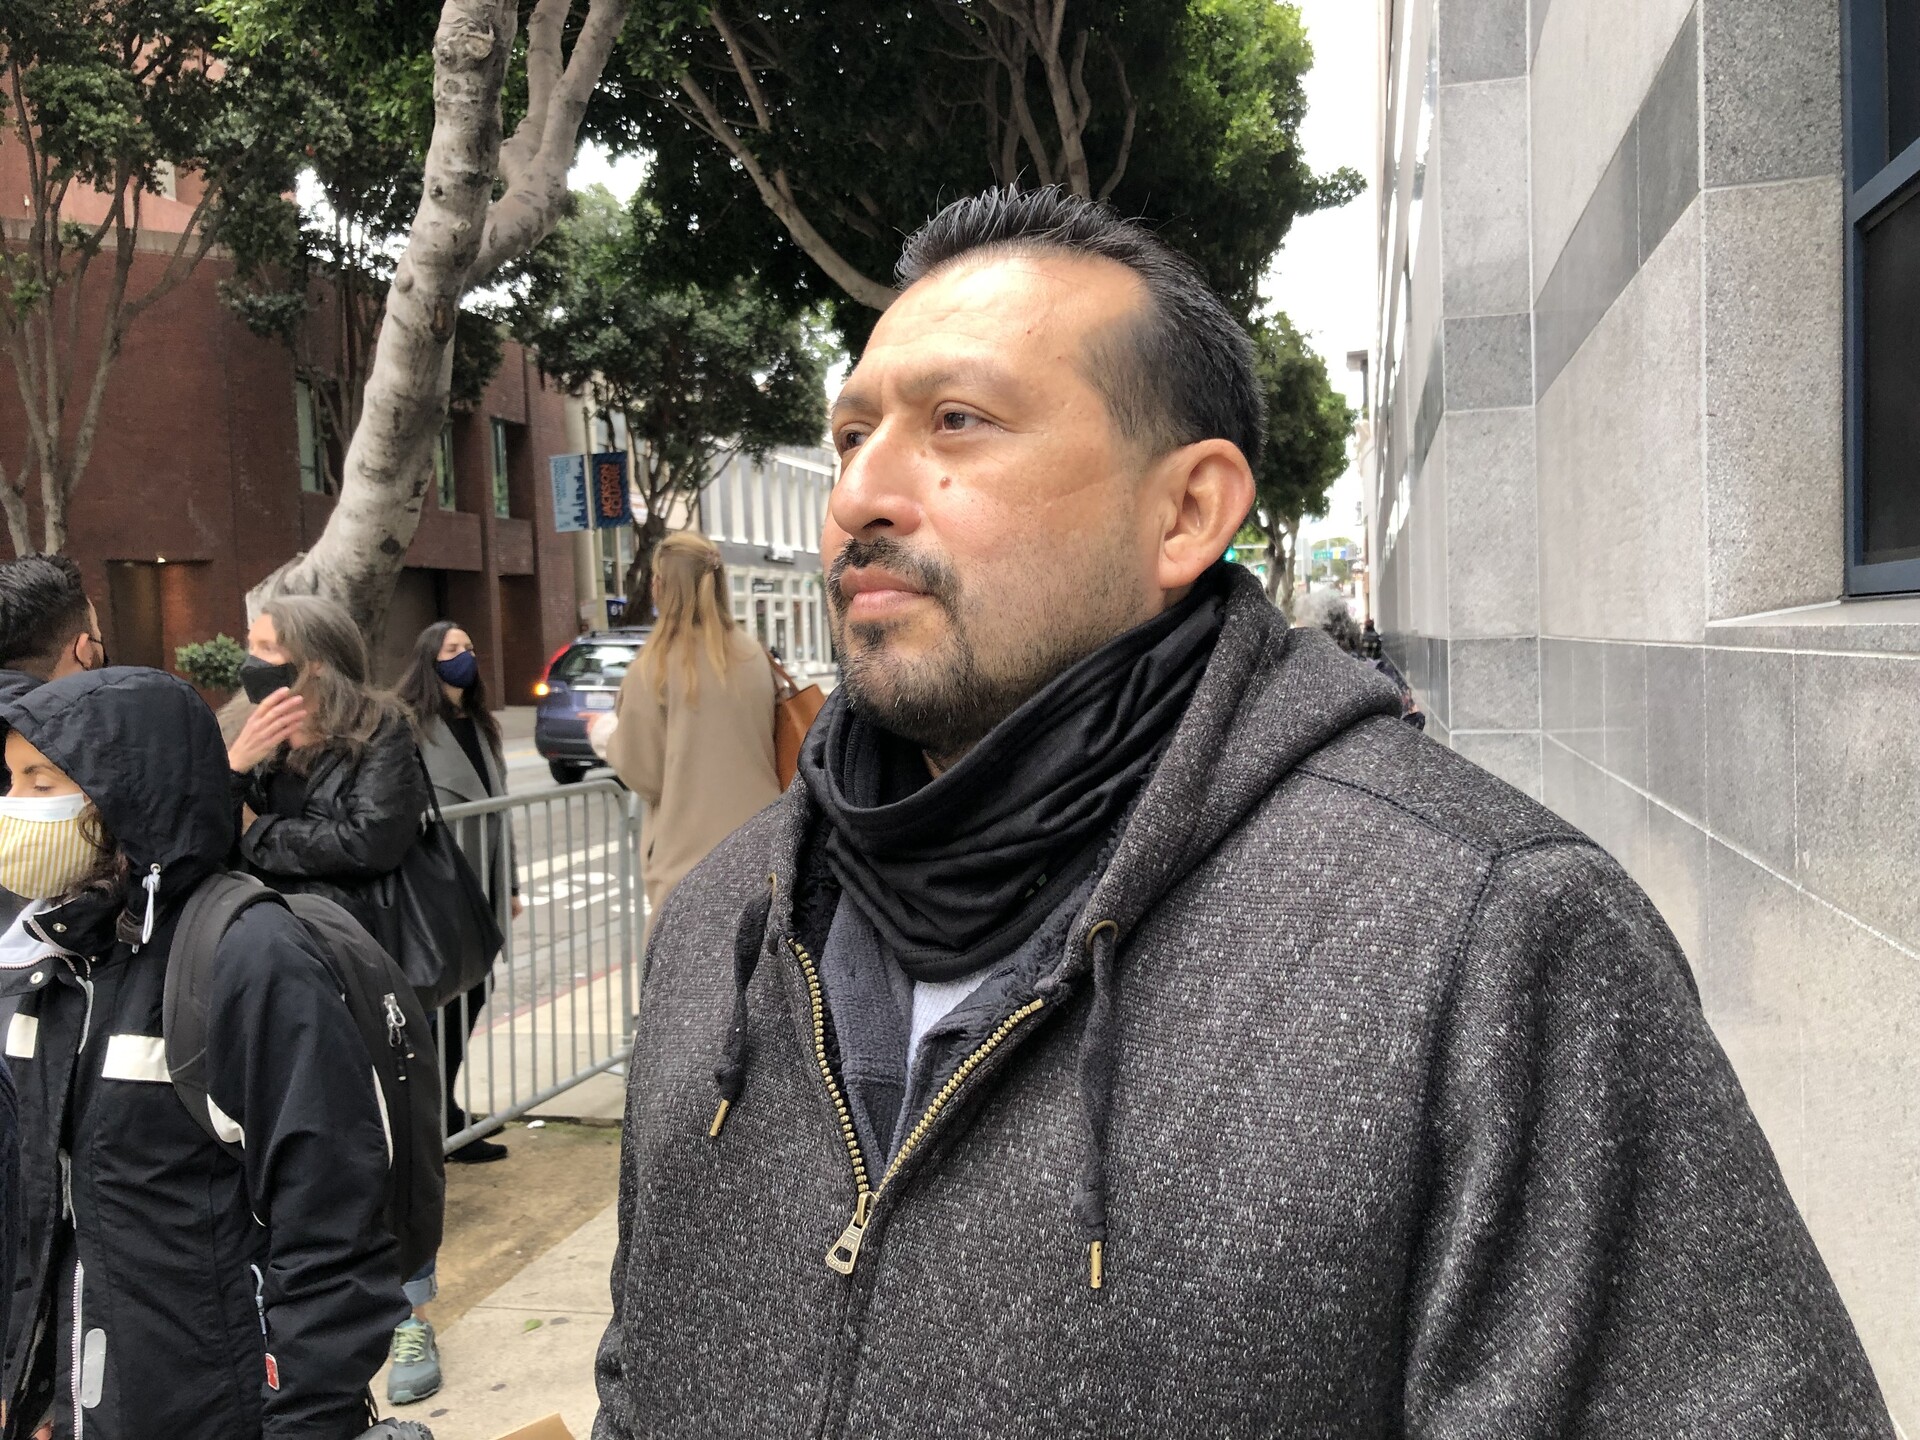 A man wearing a jacket and a scarf on a street in San Francisco, with a small group of protesters behind him.